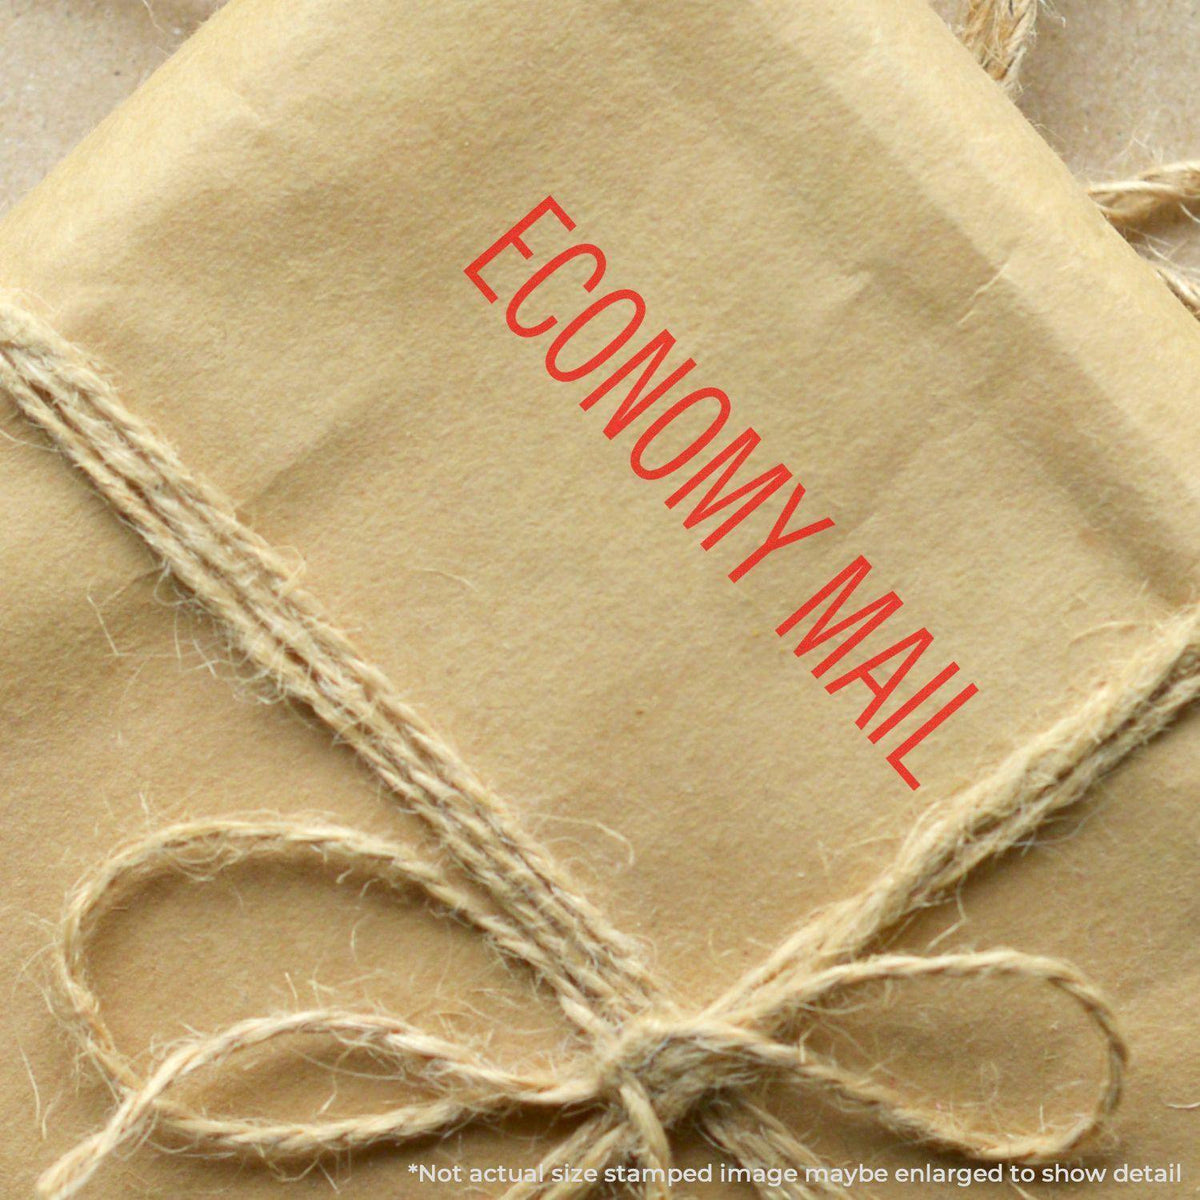 Economy Mail Rubber Stamp Lifestyle Photo